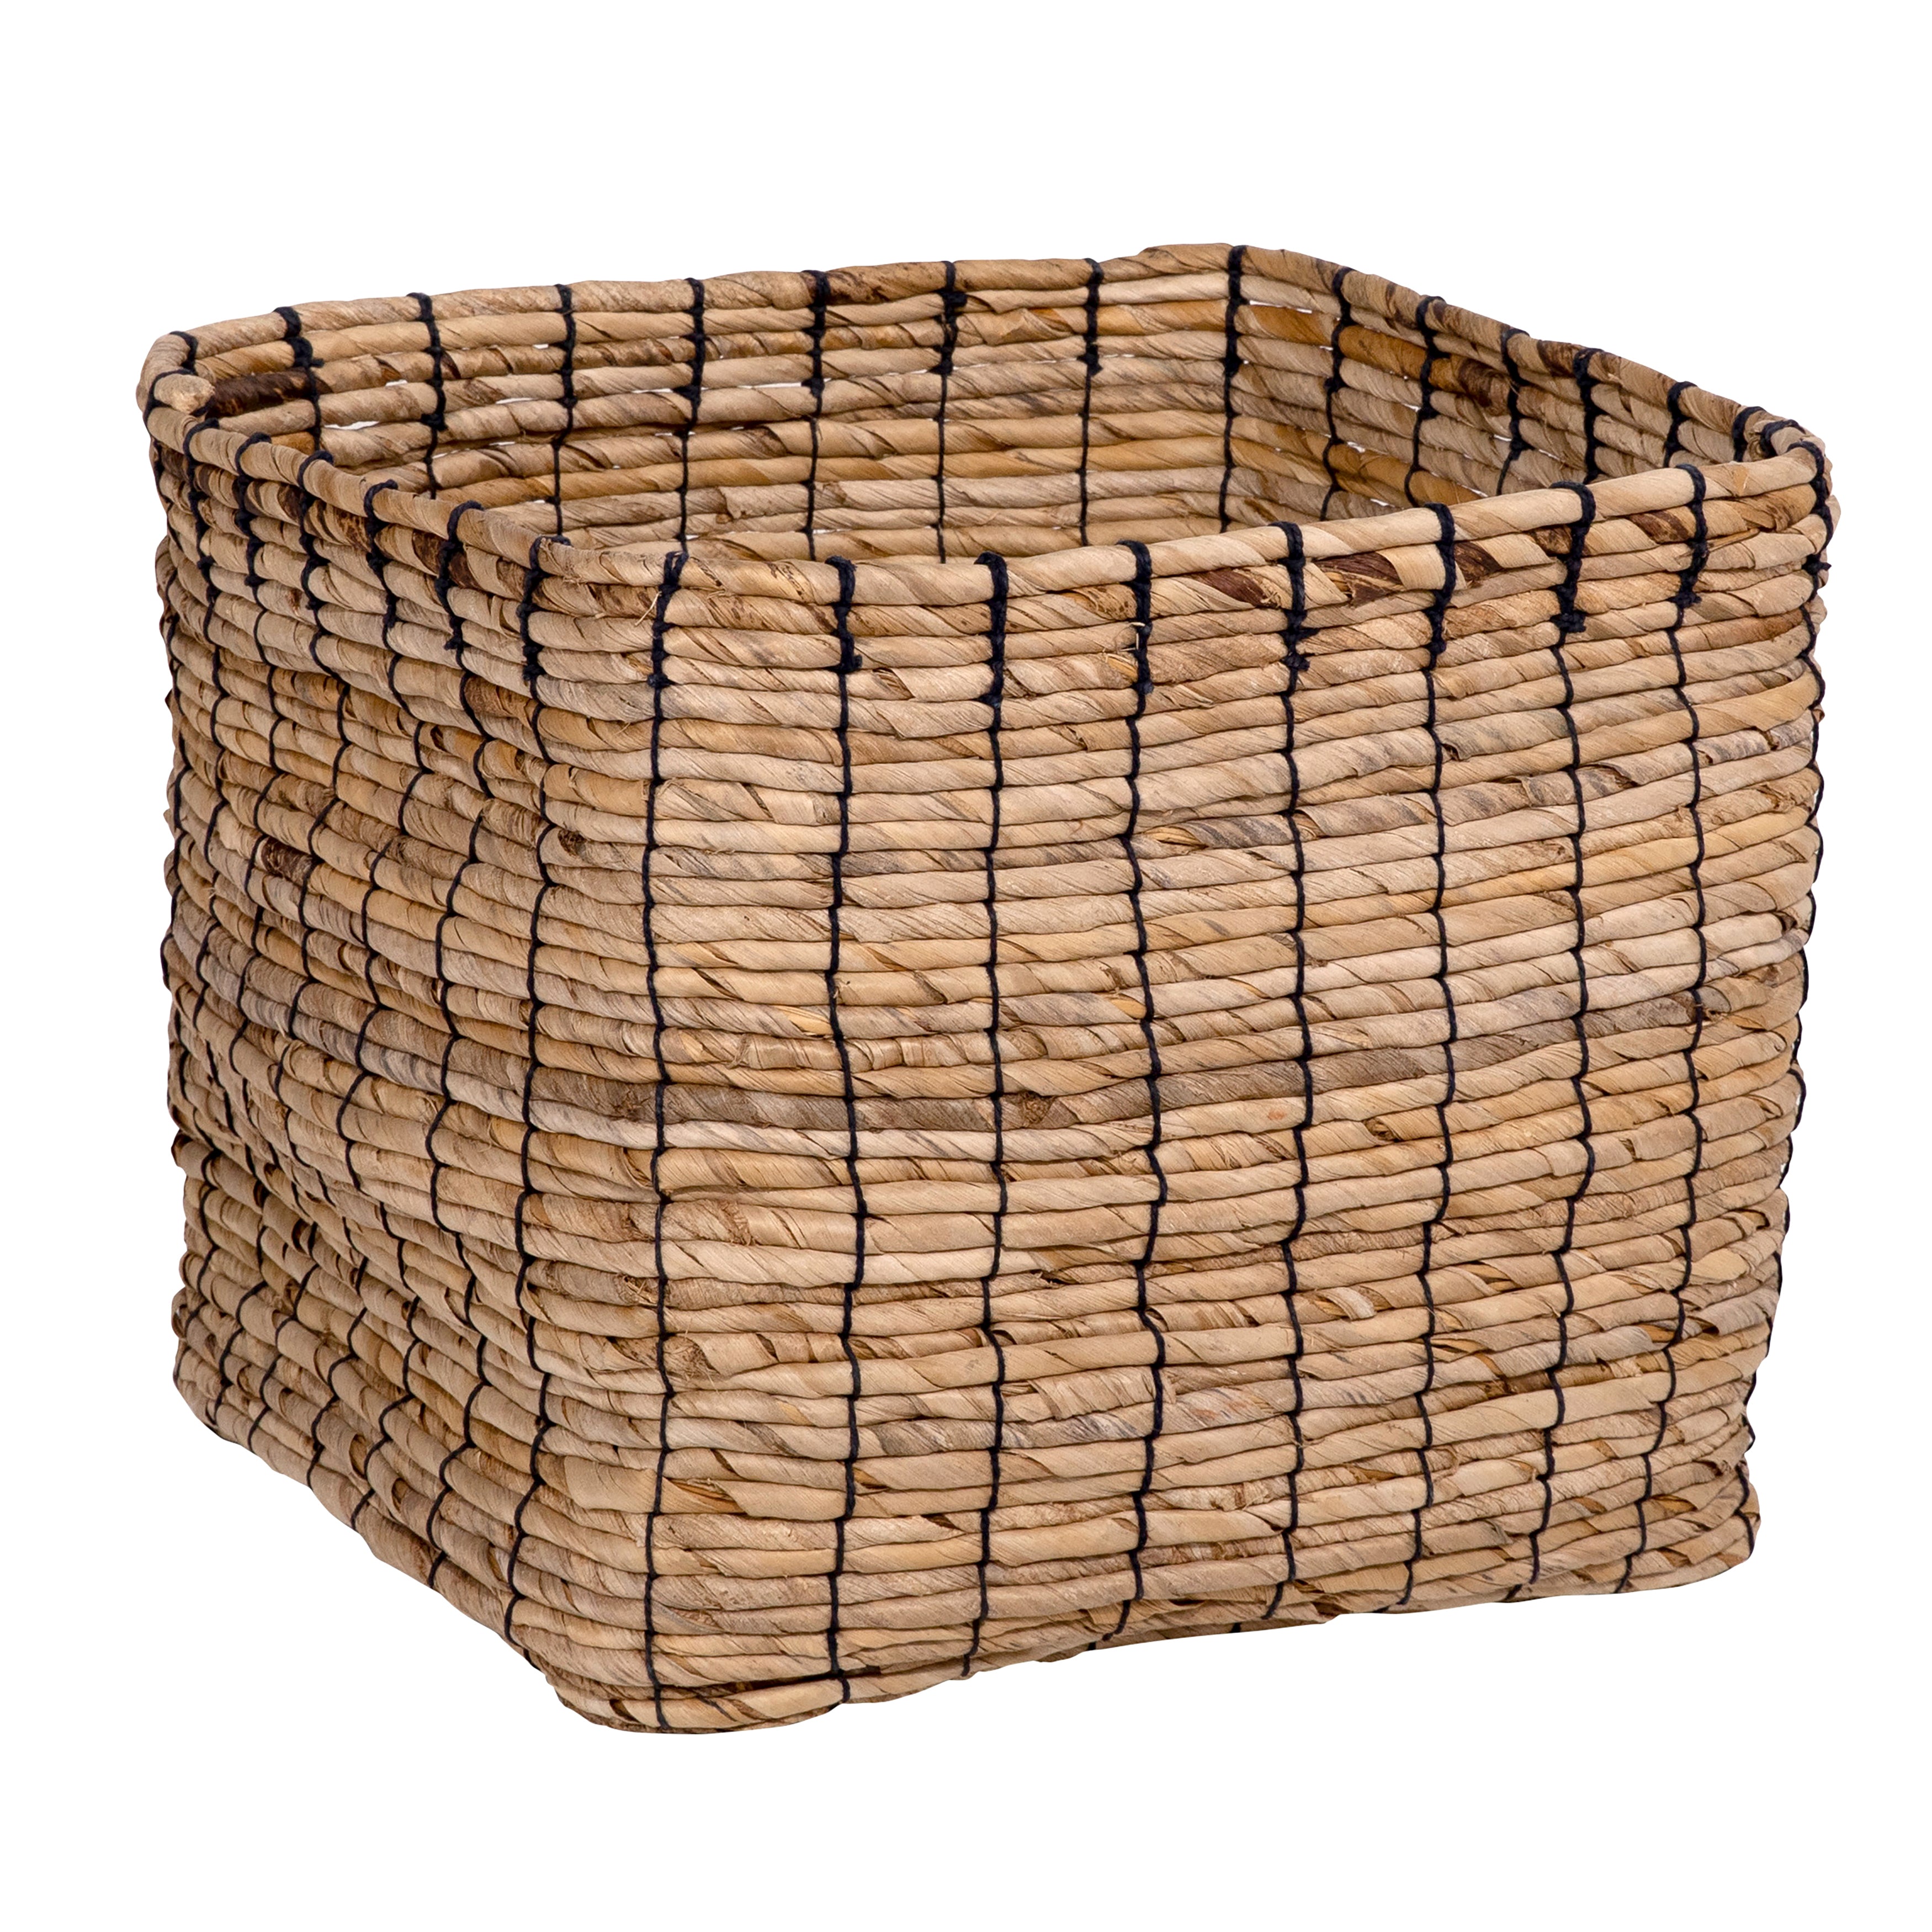 In terms of beauty and functionality, this basket adds dimension and storage wherever it's placed. Beautifully handcrafted in Indonesia using woven Abaca strands. It showcases a square shape figure that makes it easy to style under a console or beside a sofa, perfect for storing towels, throws, or housing your favorite potted plant. Amethyst Home provides interior design, new home construction design consulting, vintage area rugs, and lighting in the Boston metro area.